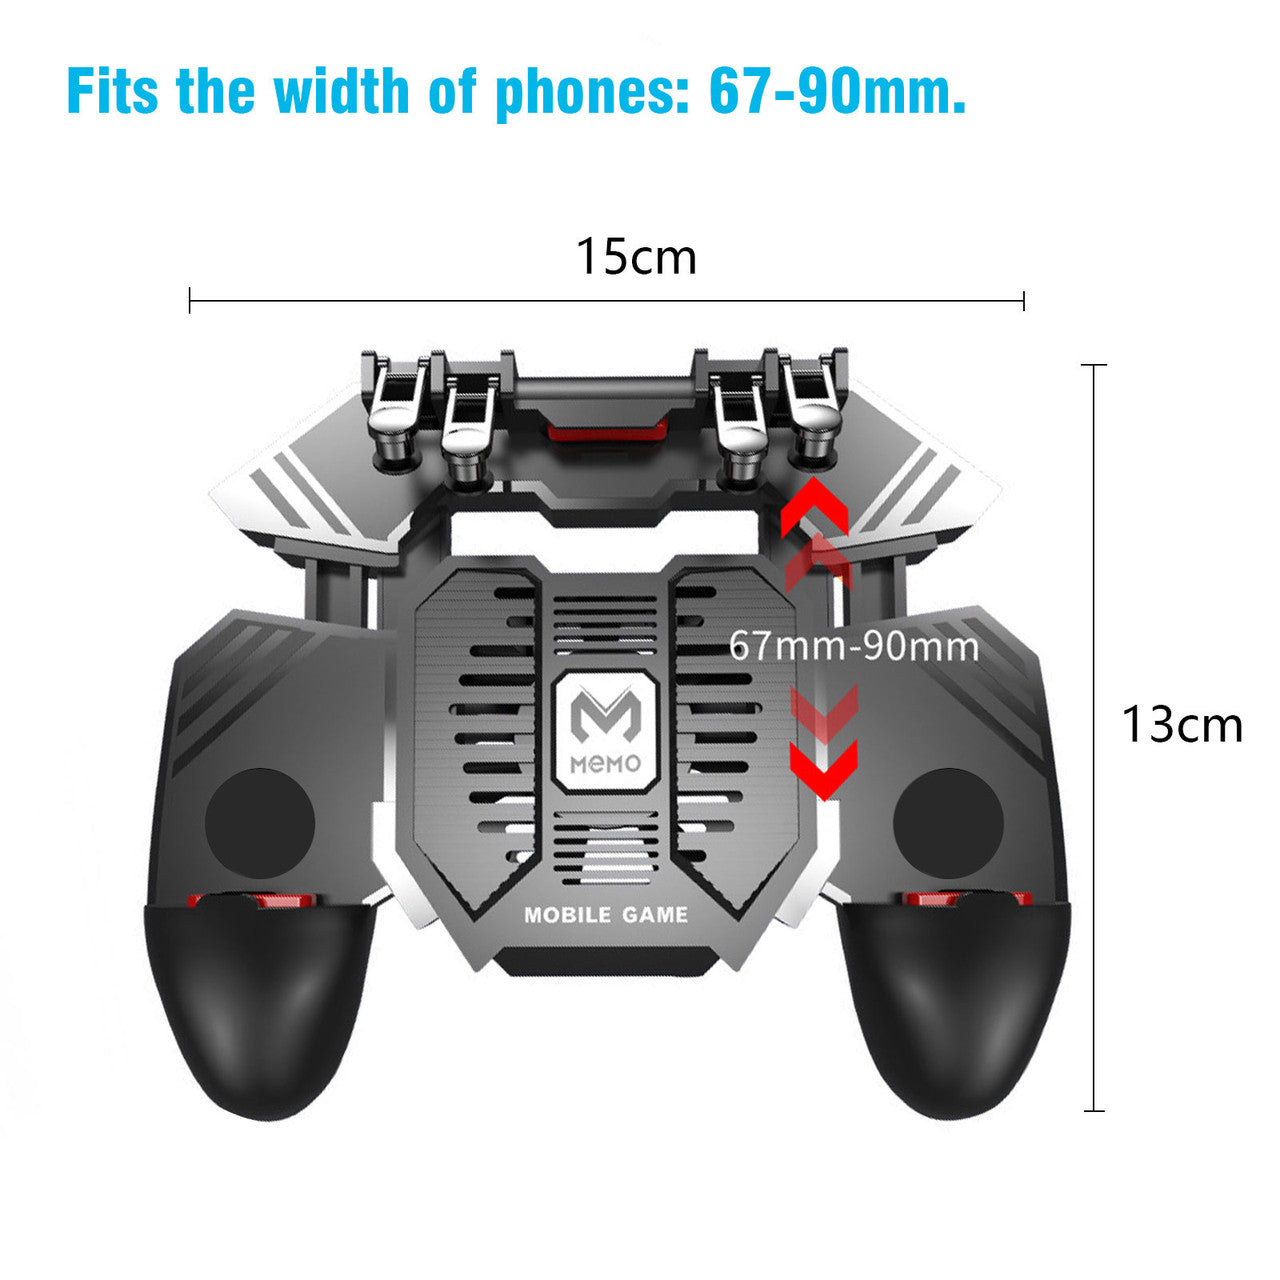 Mobile Game Controller with L1R1 Triggers, PUBG Mobile Controller 6 Fingers Operation with Cooling Fan, Joystick Remote Grip Shooting Aim Keys for iPhone Android iOS Gamepad Accessories